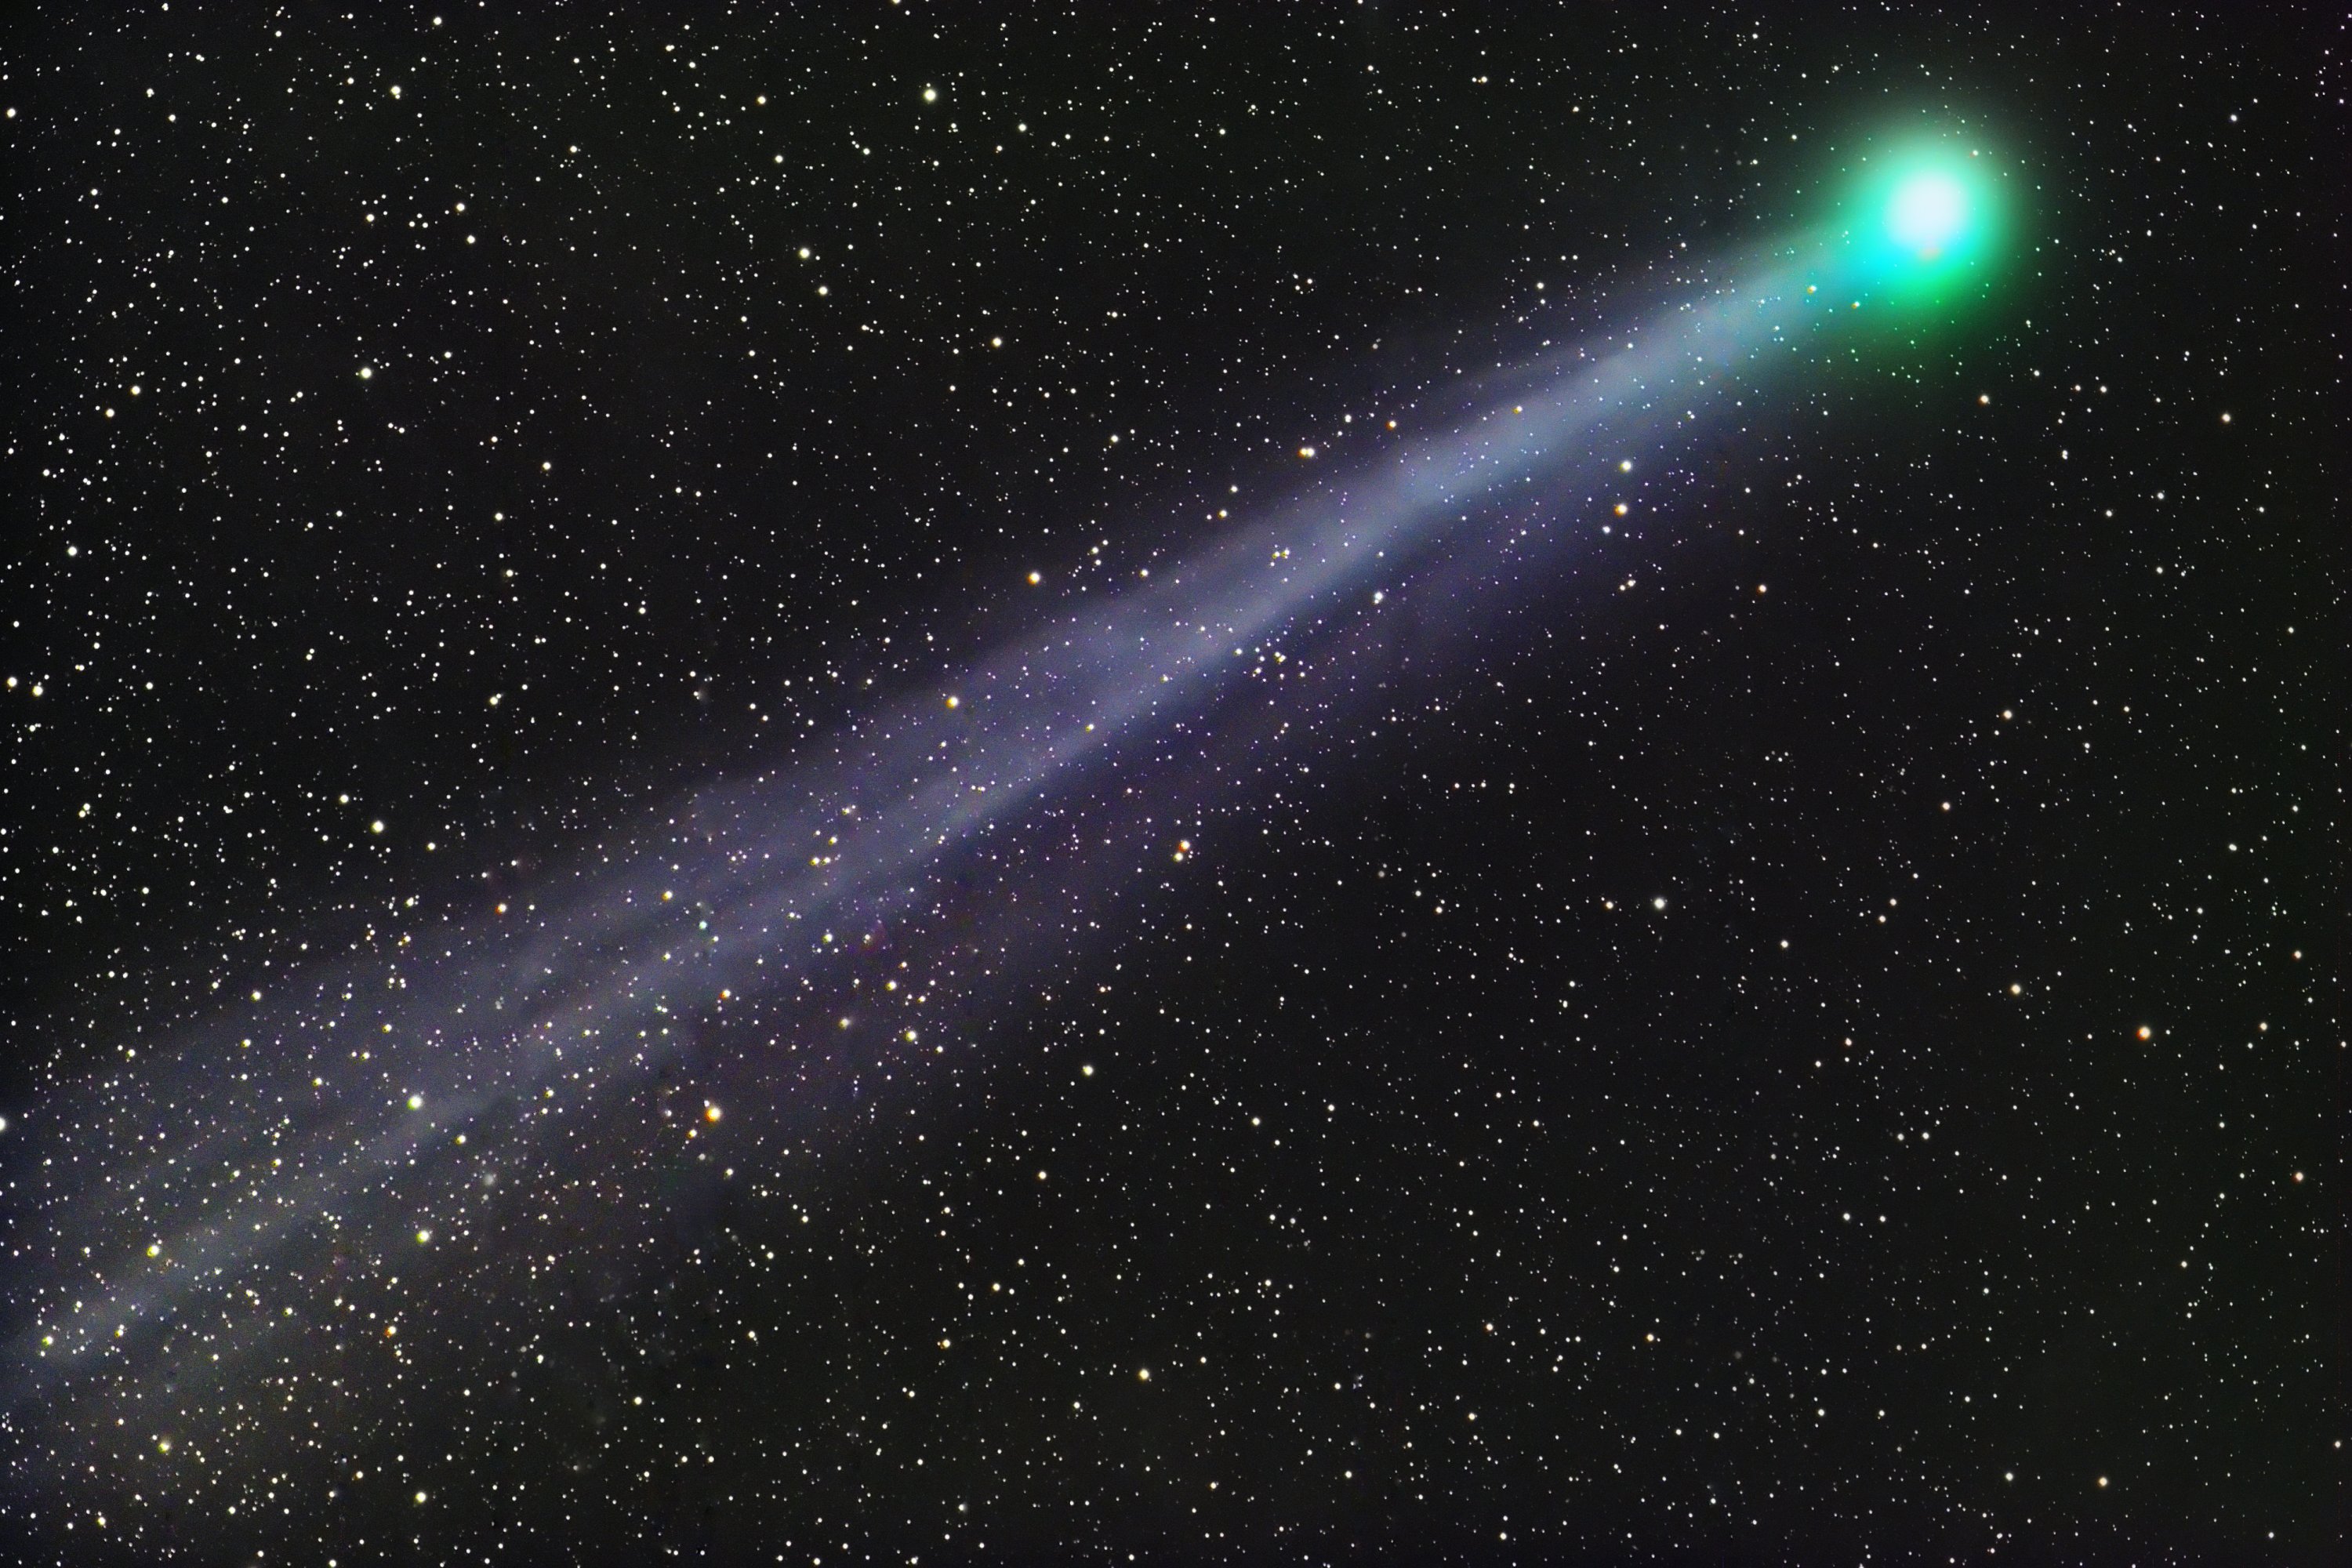 Why are comet heads green — but not their tails? MIT News